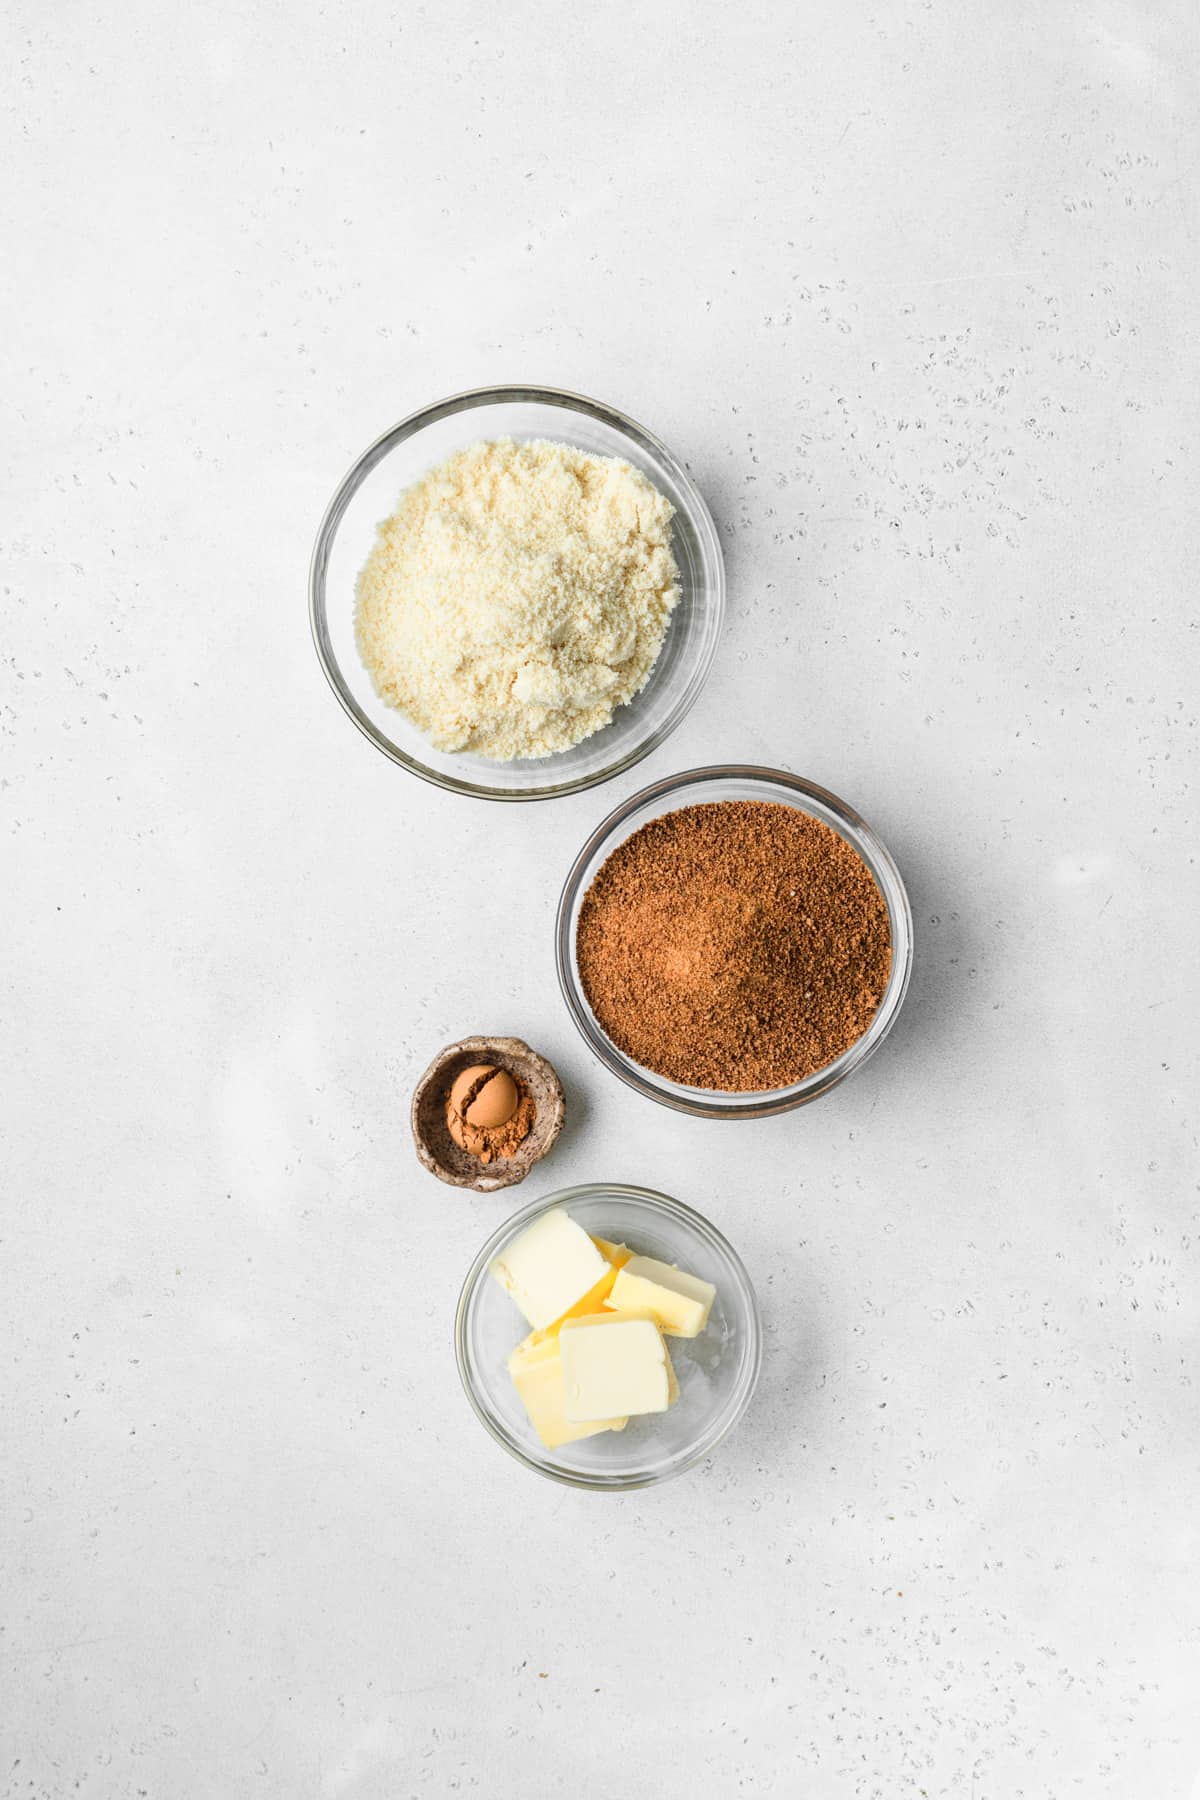 Ingredients to make cinnamon streusel topping on a white surface.